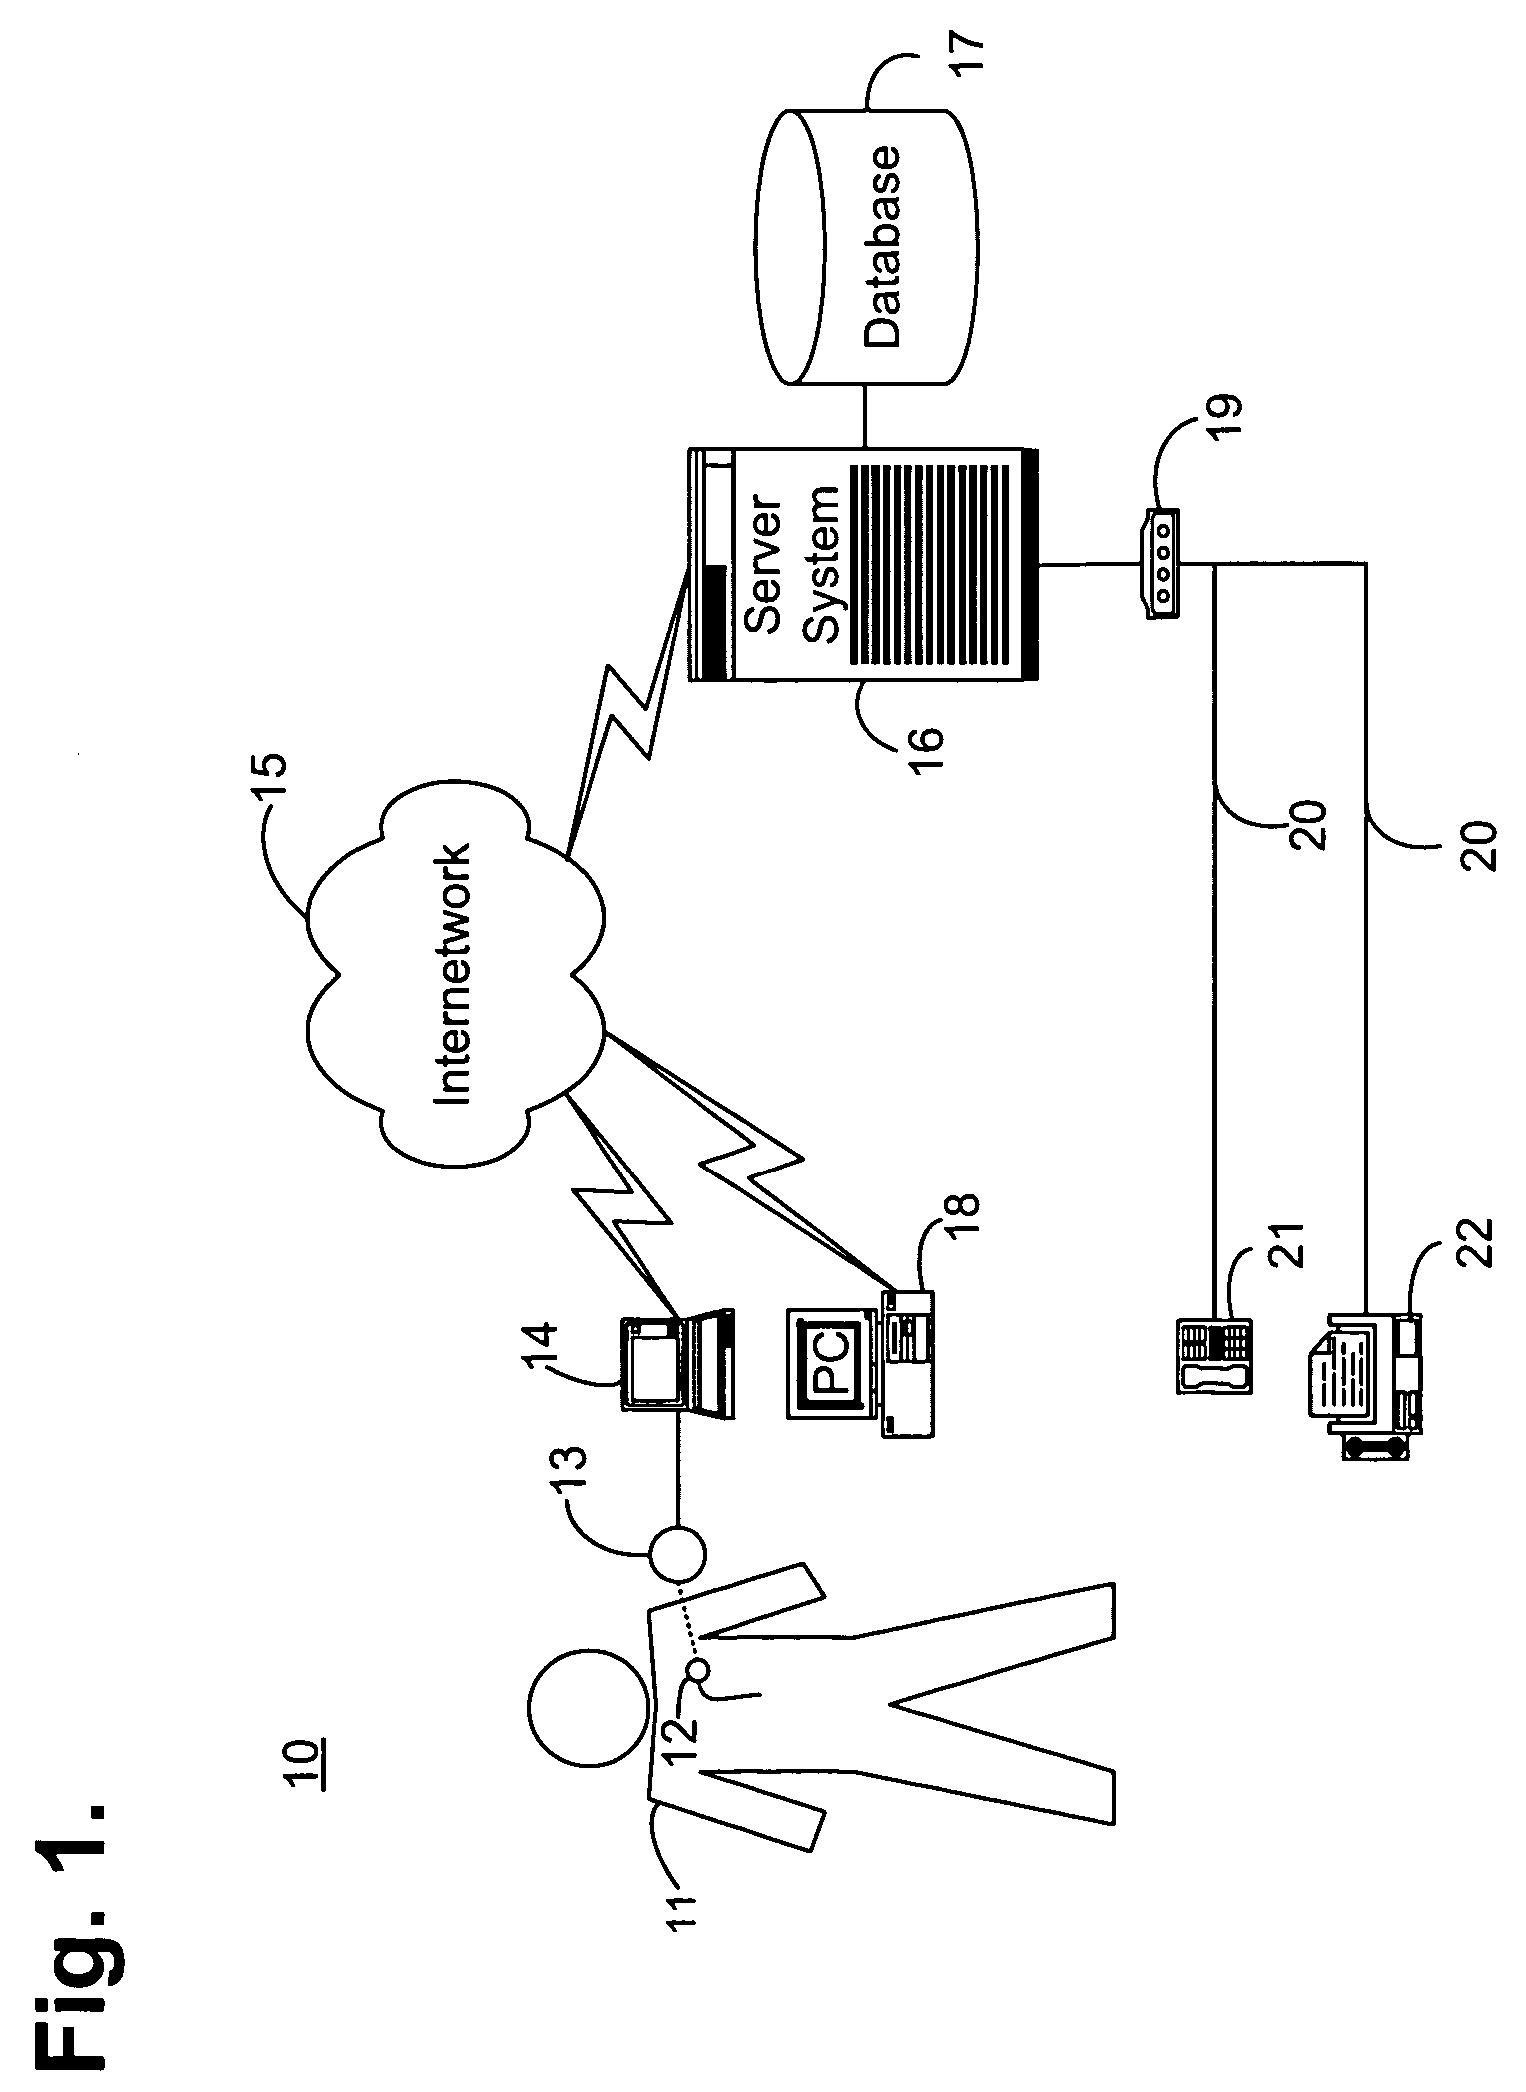 System and method for transacting an automated patient communications session